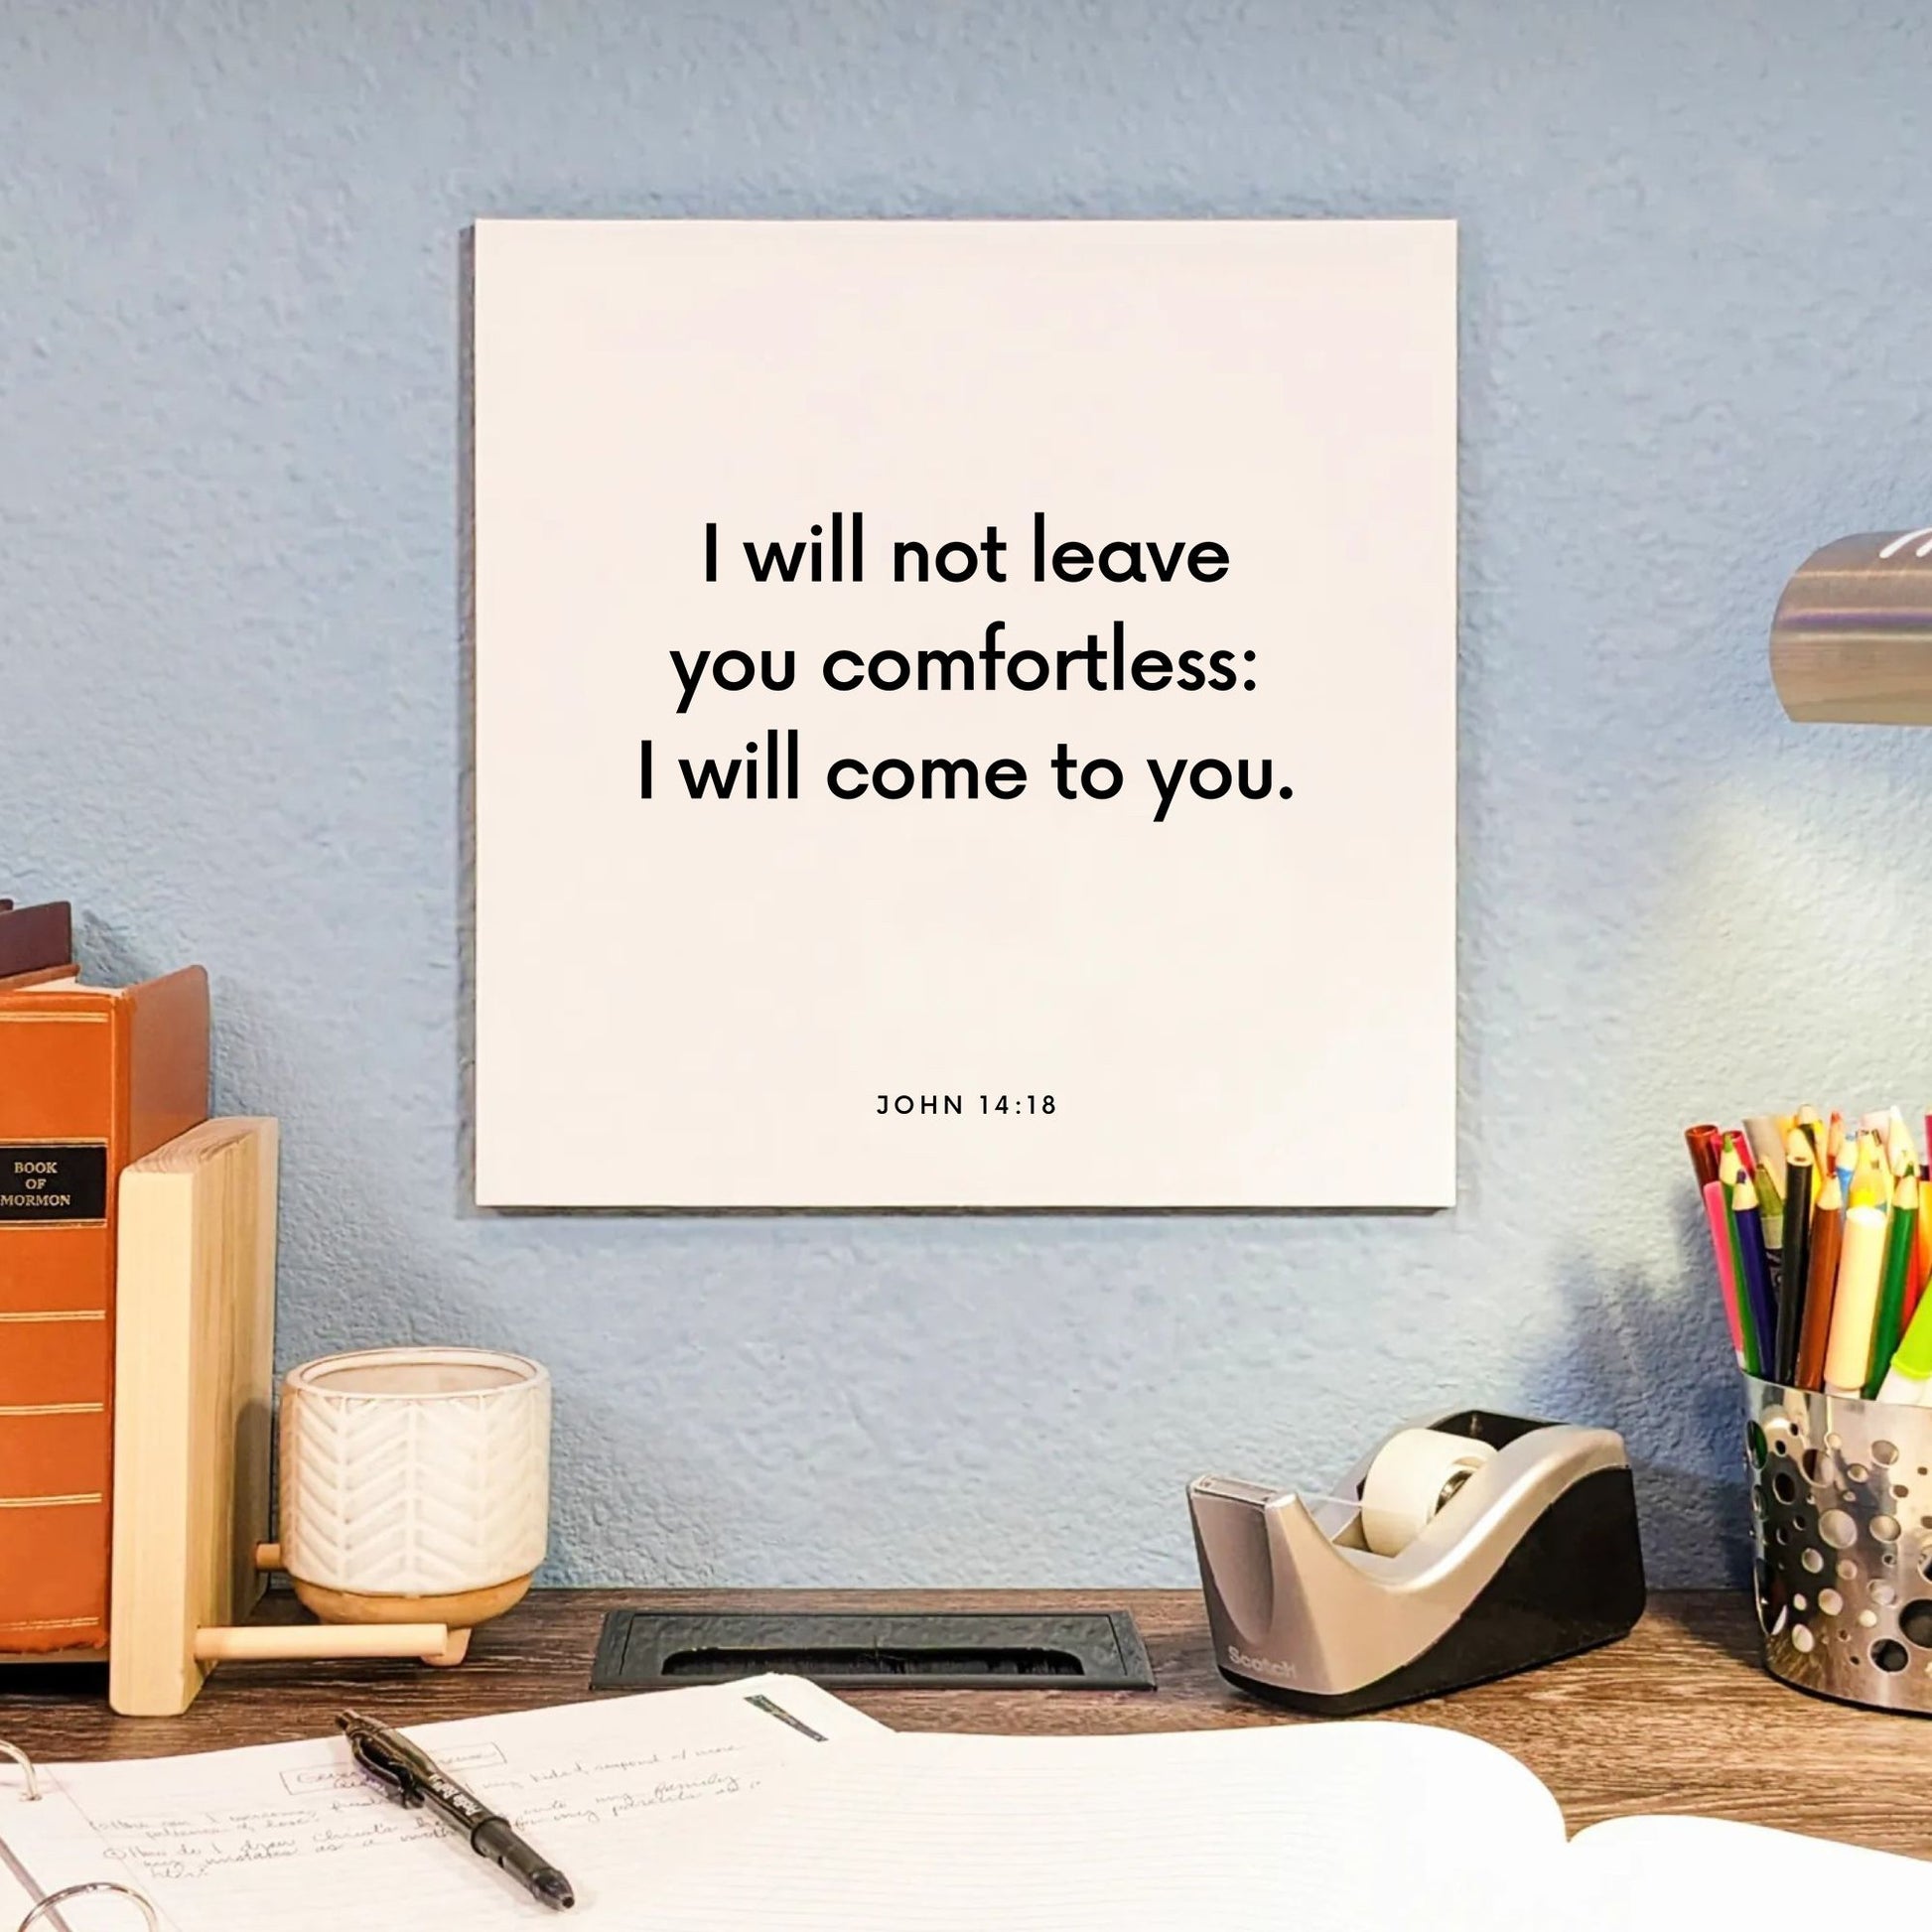 Desk mouting of the scripture tile for John 14:18 - "I will not leave you comfortless: I will come to you"